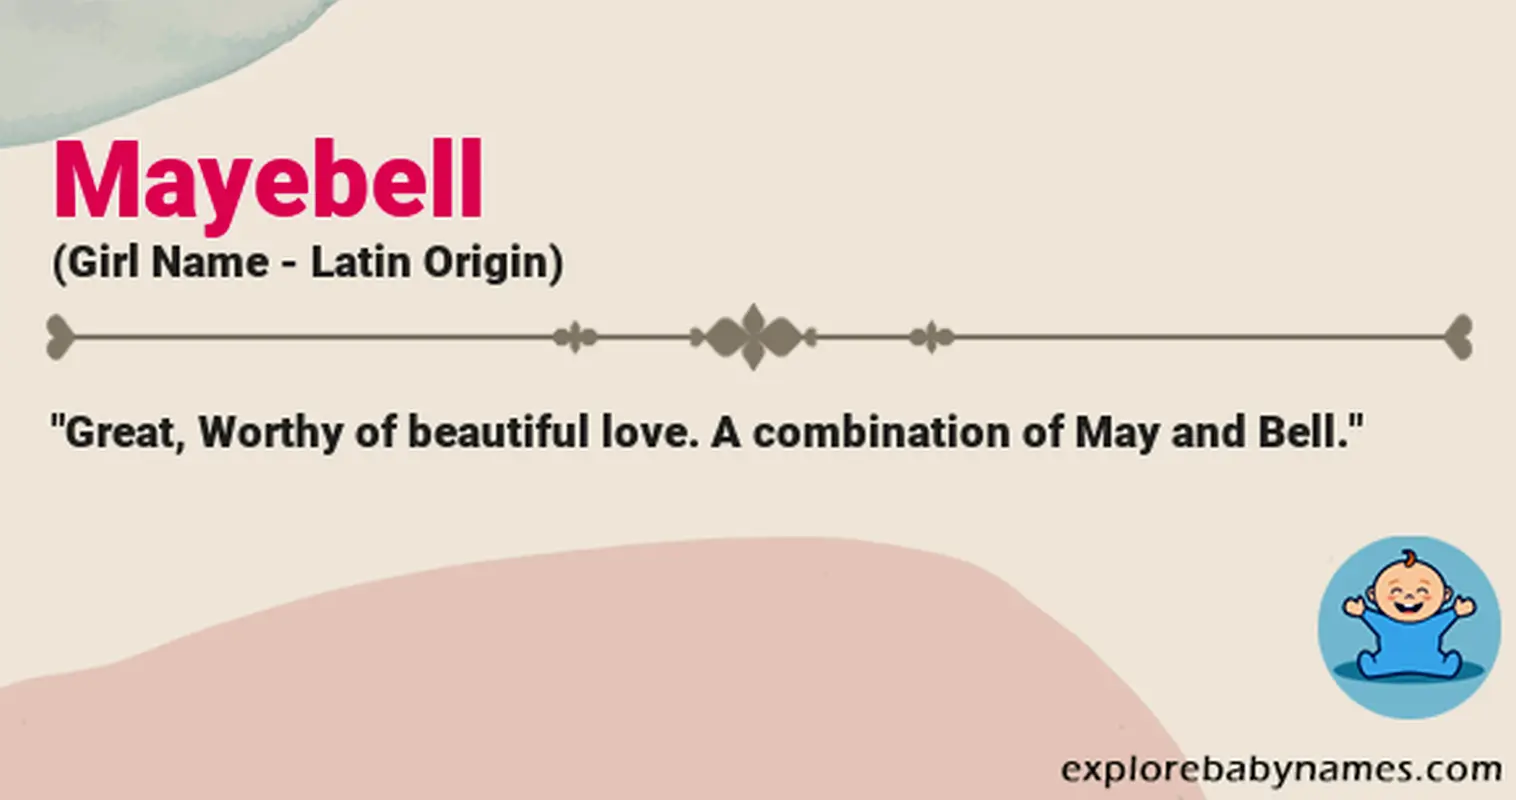 Meaning of Mayebell